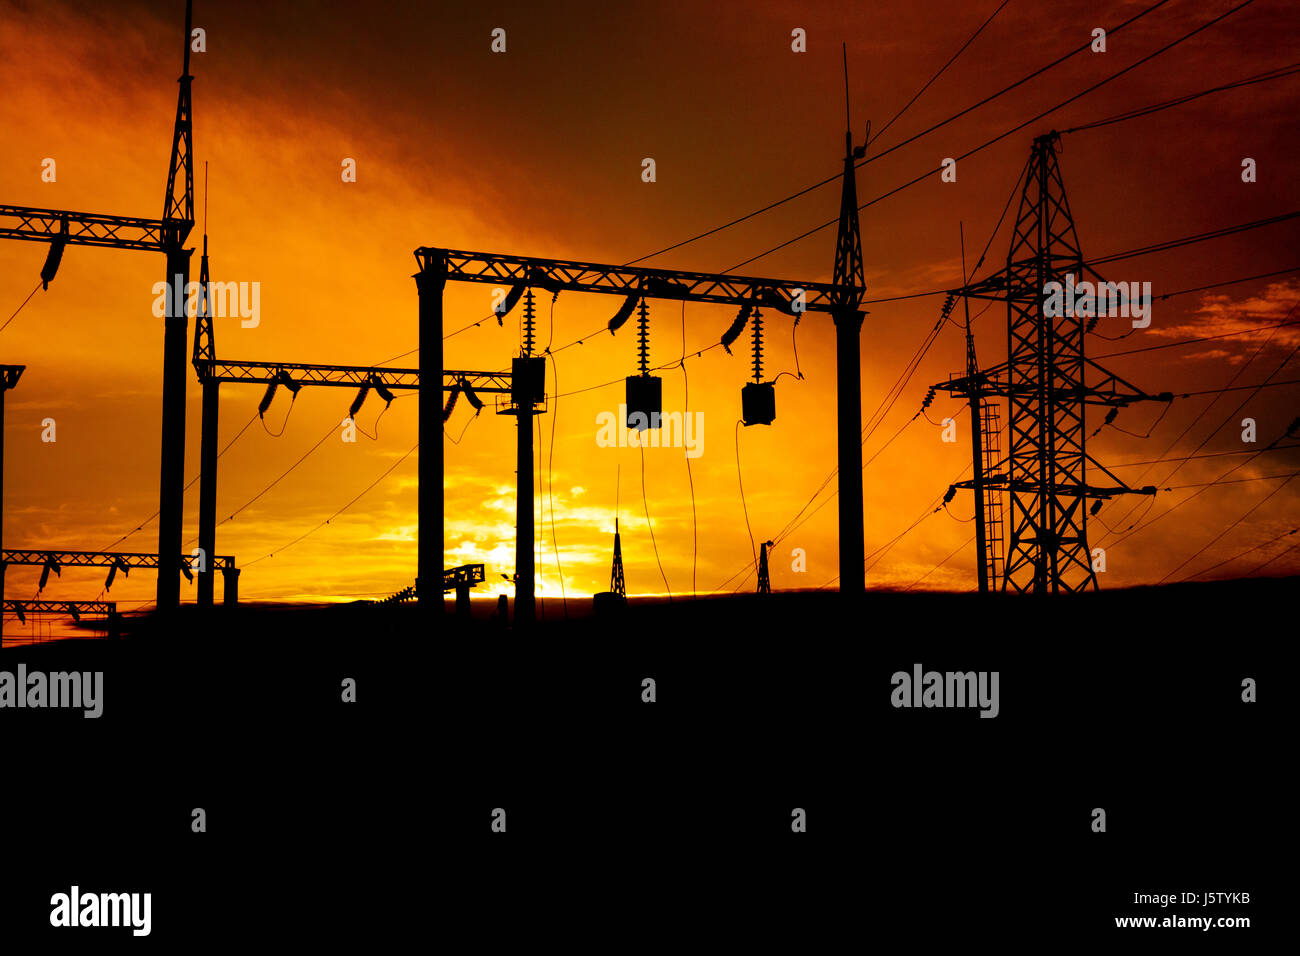 Beautiful sunset over an Electrical substation. Stock Photo